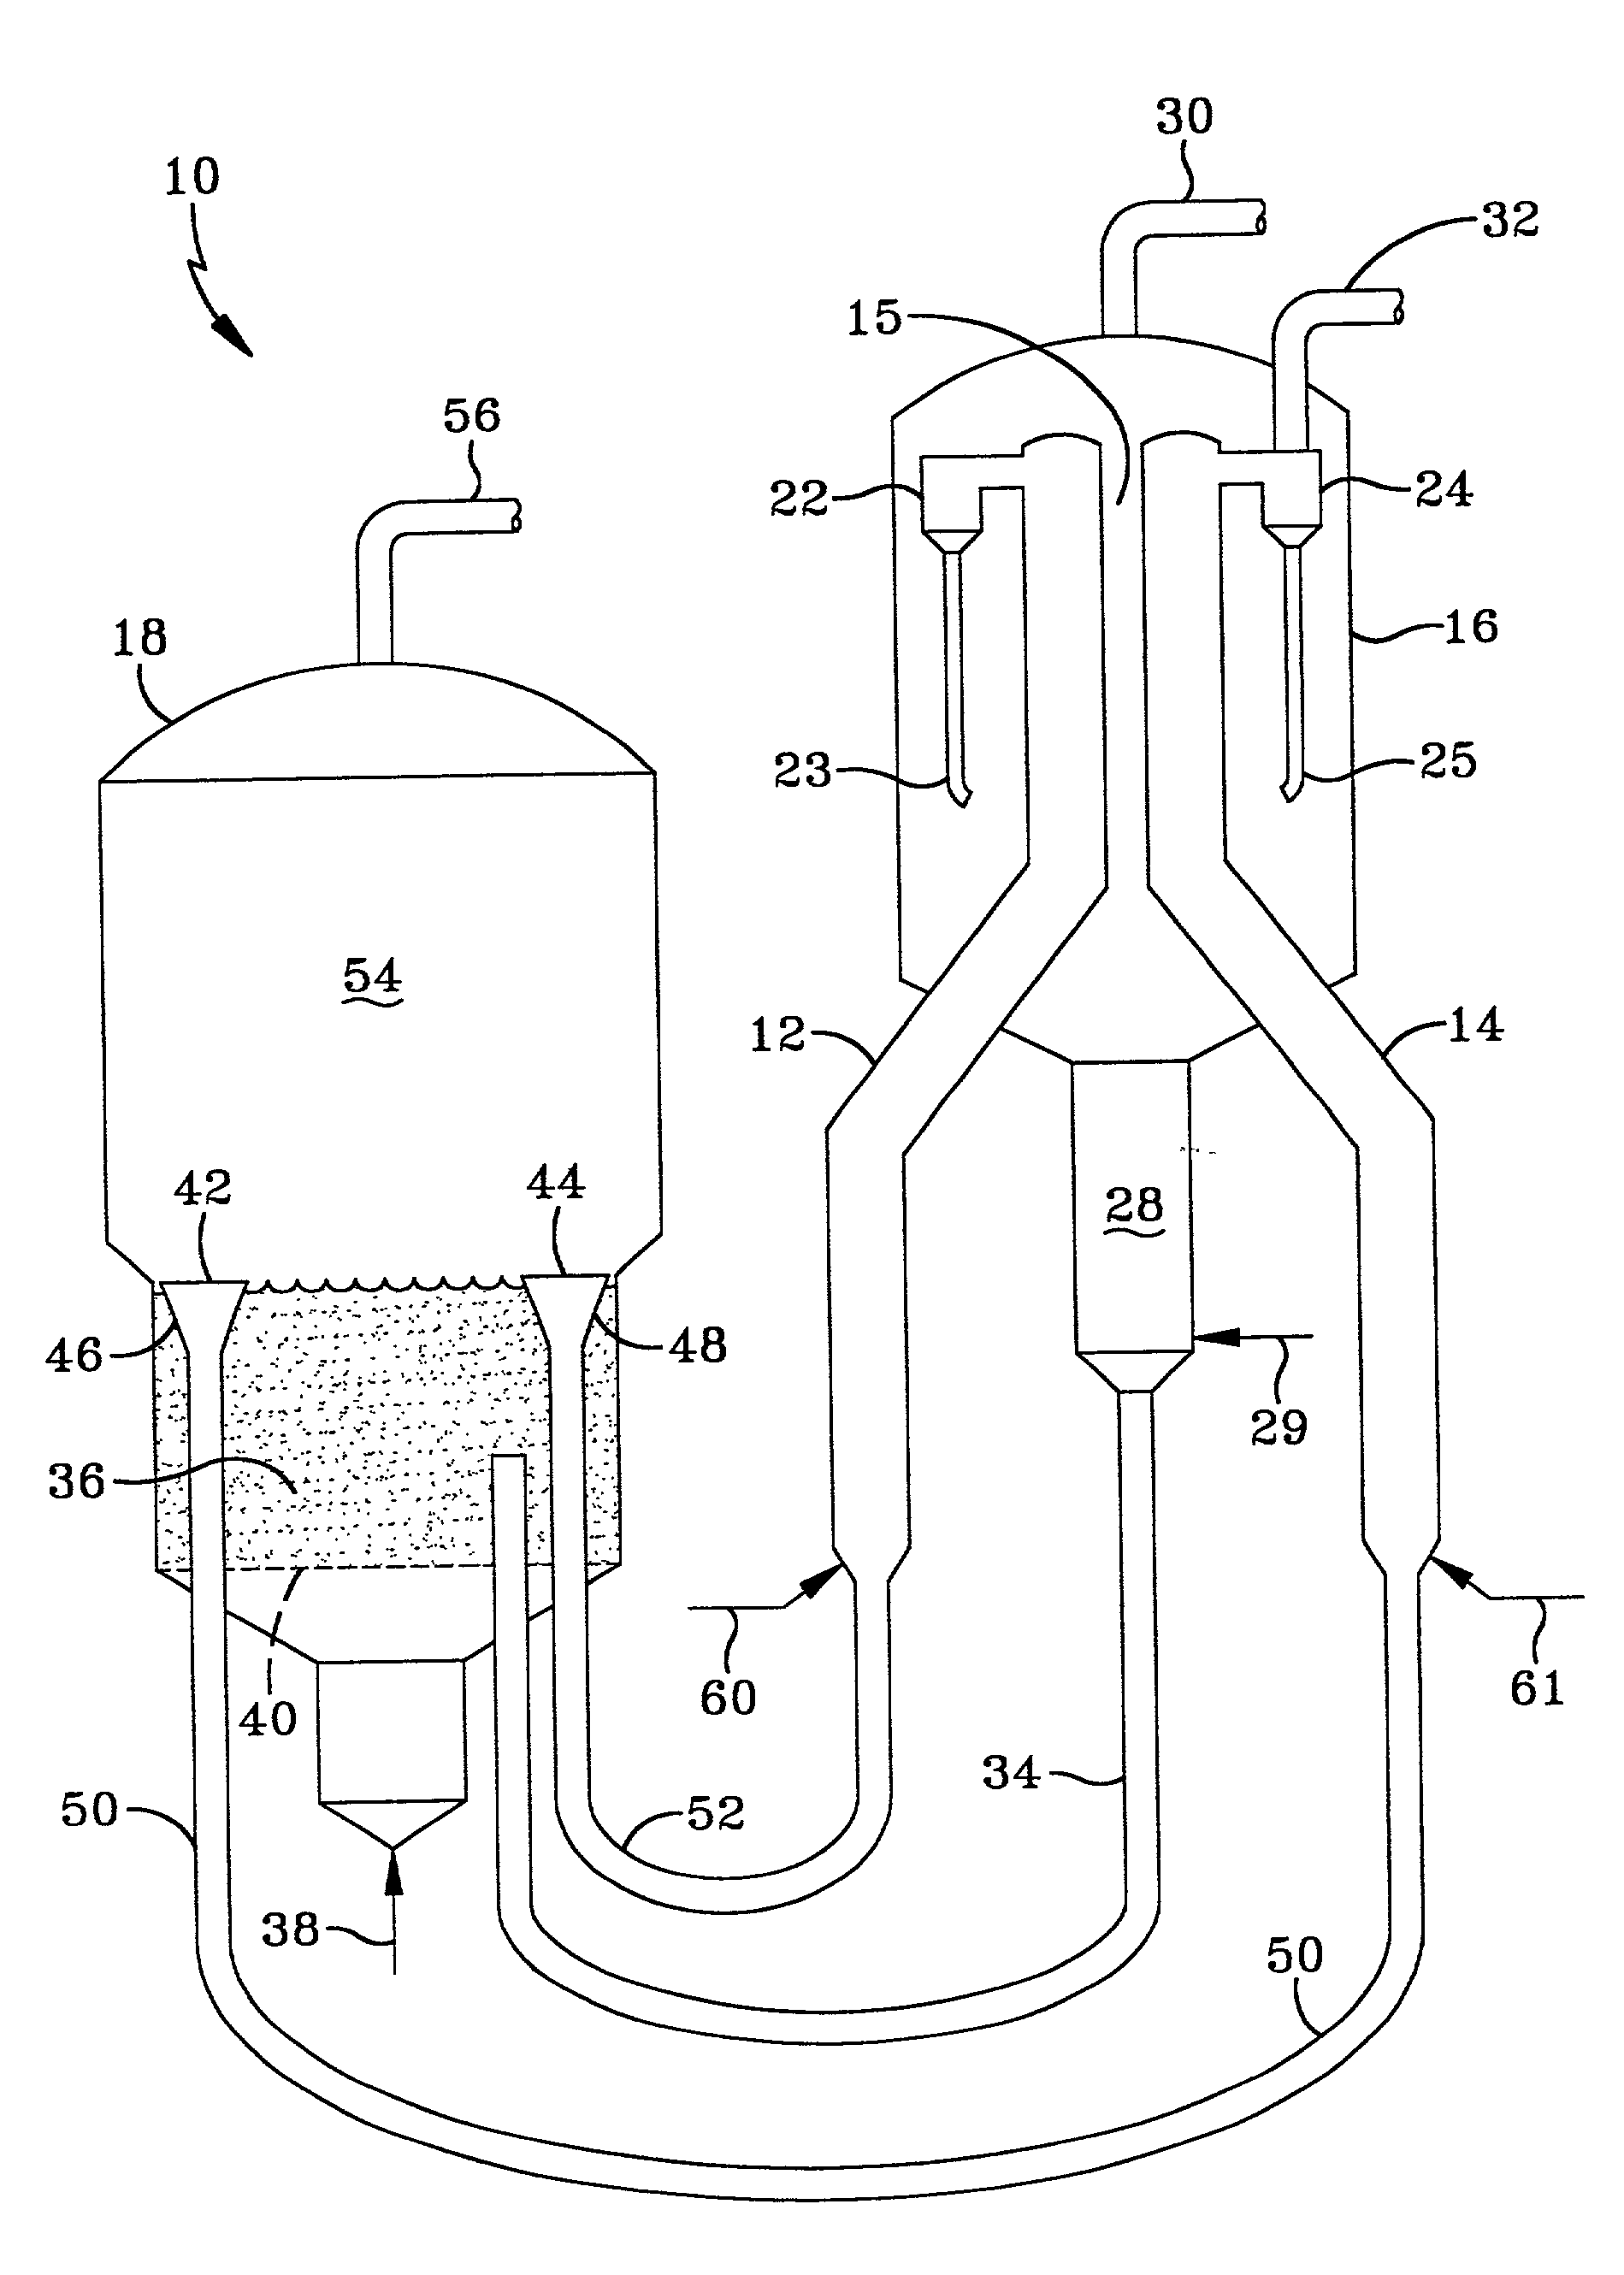 Fluid cat cracking with high olefins prouduction